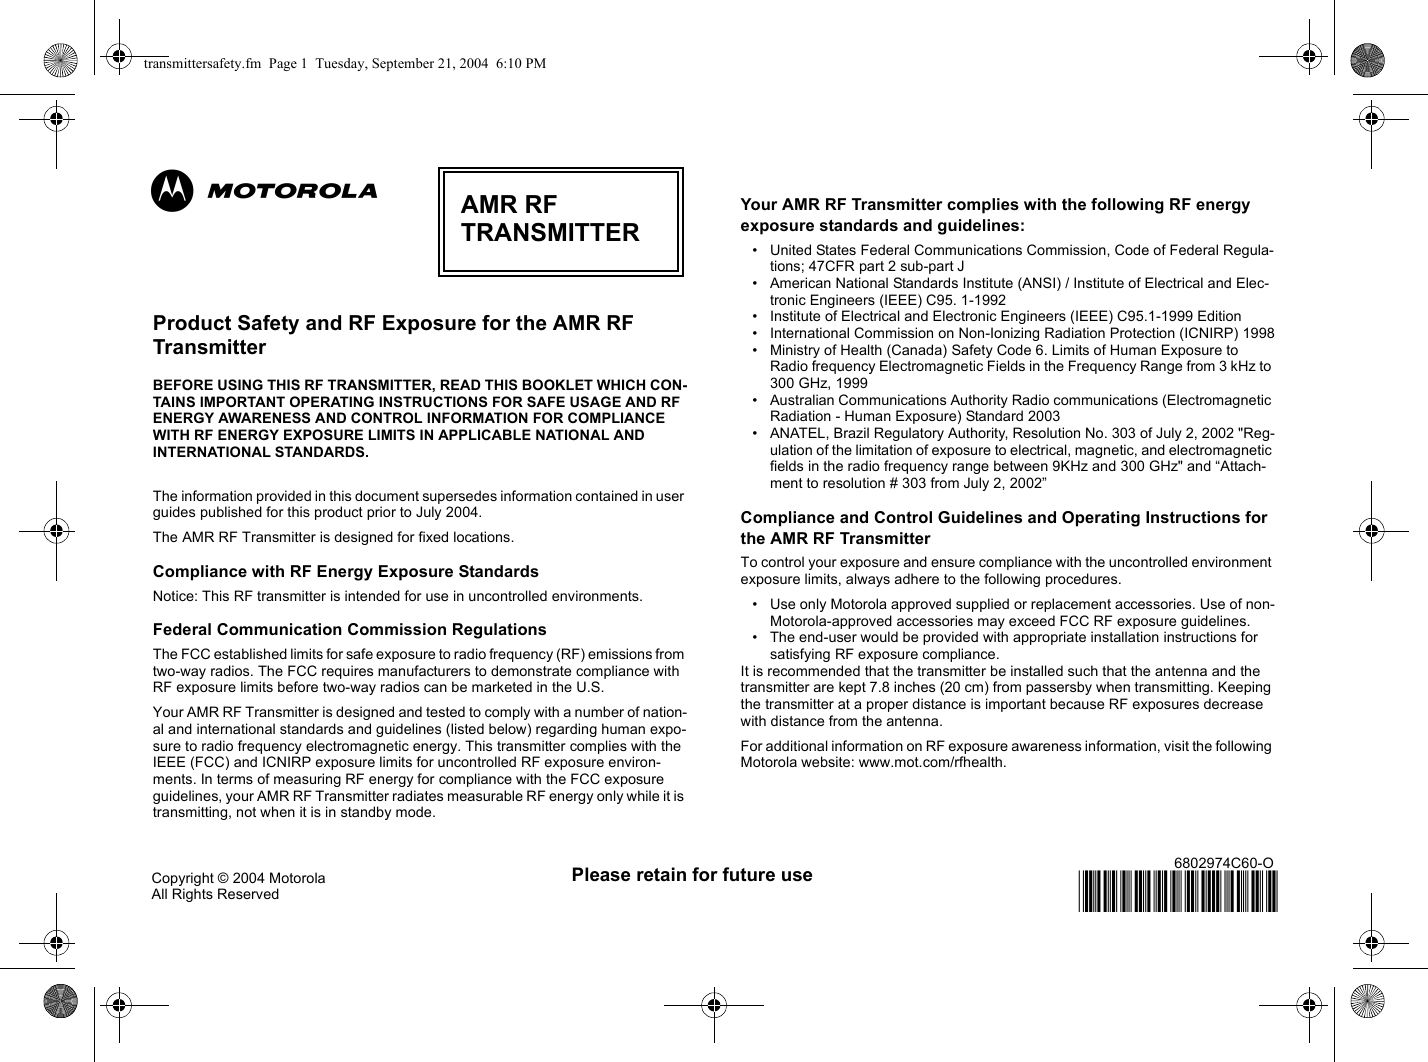  Please retain for future useCopyright © 2004 Motorola All Rights Reserved6802974C60-O@6802974C60@Product Safety and RF Exposure for the AMR RF Transmitter BEFORE USING THIS RF TRANSMITTER, READ THIS BOOKLET WHICH CON-TAINS IMPORTANT OPERATING INSTRUCTIONS FOR SAFE USAGE AND RF ENERGY AWARENESS AND CONTROL INFORMATION FOR COMPLIANCE WITH RF ENERGY EXPOSURE LIMITS IN APPLICABLE NATIONAL AND INTERNATIONAL STANDARDS. The information provided in this document supersedes information contained in user guides published for this product prior to July 2004.  The AMR RF Transmitter is designed for fixed locations.Compliance with RF Energy Exposure StandardsNotice: This RF transmitter is intended for use in uncontrolled environments. Federal Communication Commission RegulationsThe FCC established limits for safe exposure to radio frequency (RF) emissions from two-way radios. The FCC requires manufacturers to demonstrate compliance with RF exposure limits before two-way radios can be marketed in the U.S. Your AMR RF Transmitter is designed and tested to comply with a number of nation-al and international standards and guidelines (listed below) regarding human expo-sure to radio frequency electromagnetic energy. This transmitter complies with the IEEE (FCC) and ICNIRP exposure limits for uncontrolled RF exposure environ-ments. In terms of measuring RF energy for compliance with the FCC exposure guidelines, your AMR RF Transmitter radiates measurable RF energy only while it is transmitting, not when it is in standby mode. Your AMR RF Transmitter complies with the following RF energy exposure standards and guidelines:• United States Federal Communications Commission, Code of Federal Regula-tions; 47CFR part 2 sub-part J• American National Standards Institute (ANSI) / Institute of Electrical and Elec-tronic Engineers (IEEE) C95. 1-1992• Institute of Electrical and Electronic Engineers (IEEE) C95.1-1999 Edition• International Commission on Non-Ionizing Radiation Protection (ICNIRP) 1998• Ministry of Health (Canada) Safety Code 6. Limits of Human Exposure to Radio frequency Electromagnetic Fields in the Frequency Range from 3 kHz to 300 GHz, 1999• Australian Communications Authority Radio communications (Electromagnetic Radiation - Human Exposure) Standard 2003 • ANATEL, Brazil Regulatory Authority, Resolution No. 303 of July 2, 2002 &quot;Reg-ulation of the limitation of exposure to electrical, magnetic, and electromagnetic fields in the radio frequency range between 9KHz and 300 GHz&quot; and “Attach-ment to resolution # 303 from July 2, 2002”Compliance and Control Guidelines and Operating Instructions for the AMR RF Transmitter To control your exposure and ensure compliance with the uncontrolled environment exposure limits, always adhere to the following procedures.• Use only Motorola approved supplied or replacement accessories. Use of non-Motorola-approved accessories may exceed FCC RF exposure guidelines. • The end-user would be provided with appropriate installation instructions for satisfying RF exposure compliance.It is recommended that the transmitter be installed such that the antenna and the transmitter are kept 7.8 inches (20 cm) from passersby when transmitting. Keeping the transmitter at a proper distance is important because RF exposures decrease with distance from the antenna. For additional information on RF exposure awareness information, visit the following Motorola website: www.mot.com/rfhealth.AMR RFTRANSMITTERabtransmittersafety.fm  Page 1  Tuesday, September 21, 2004  6:10 PM